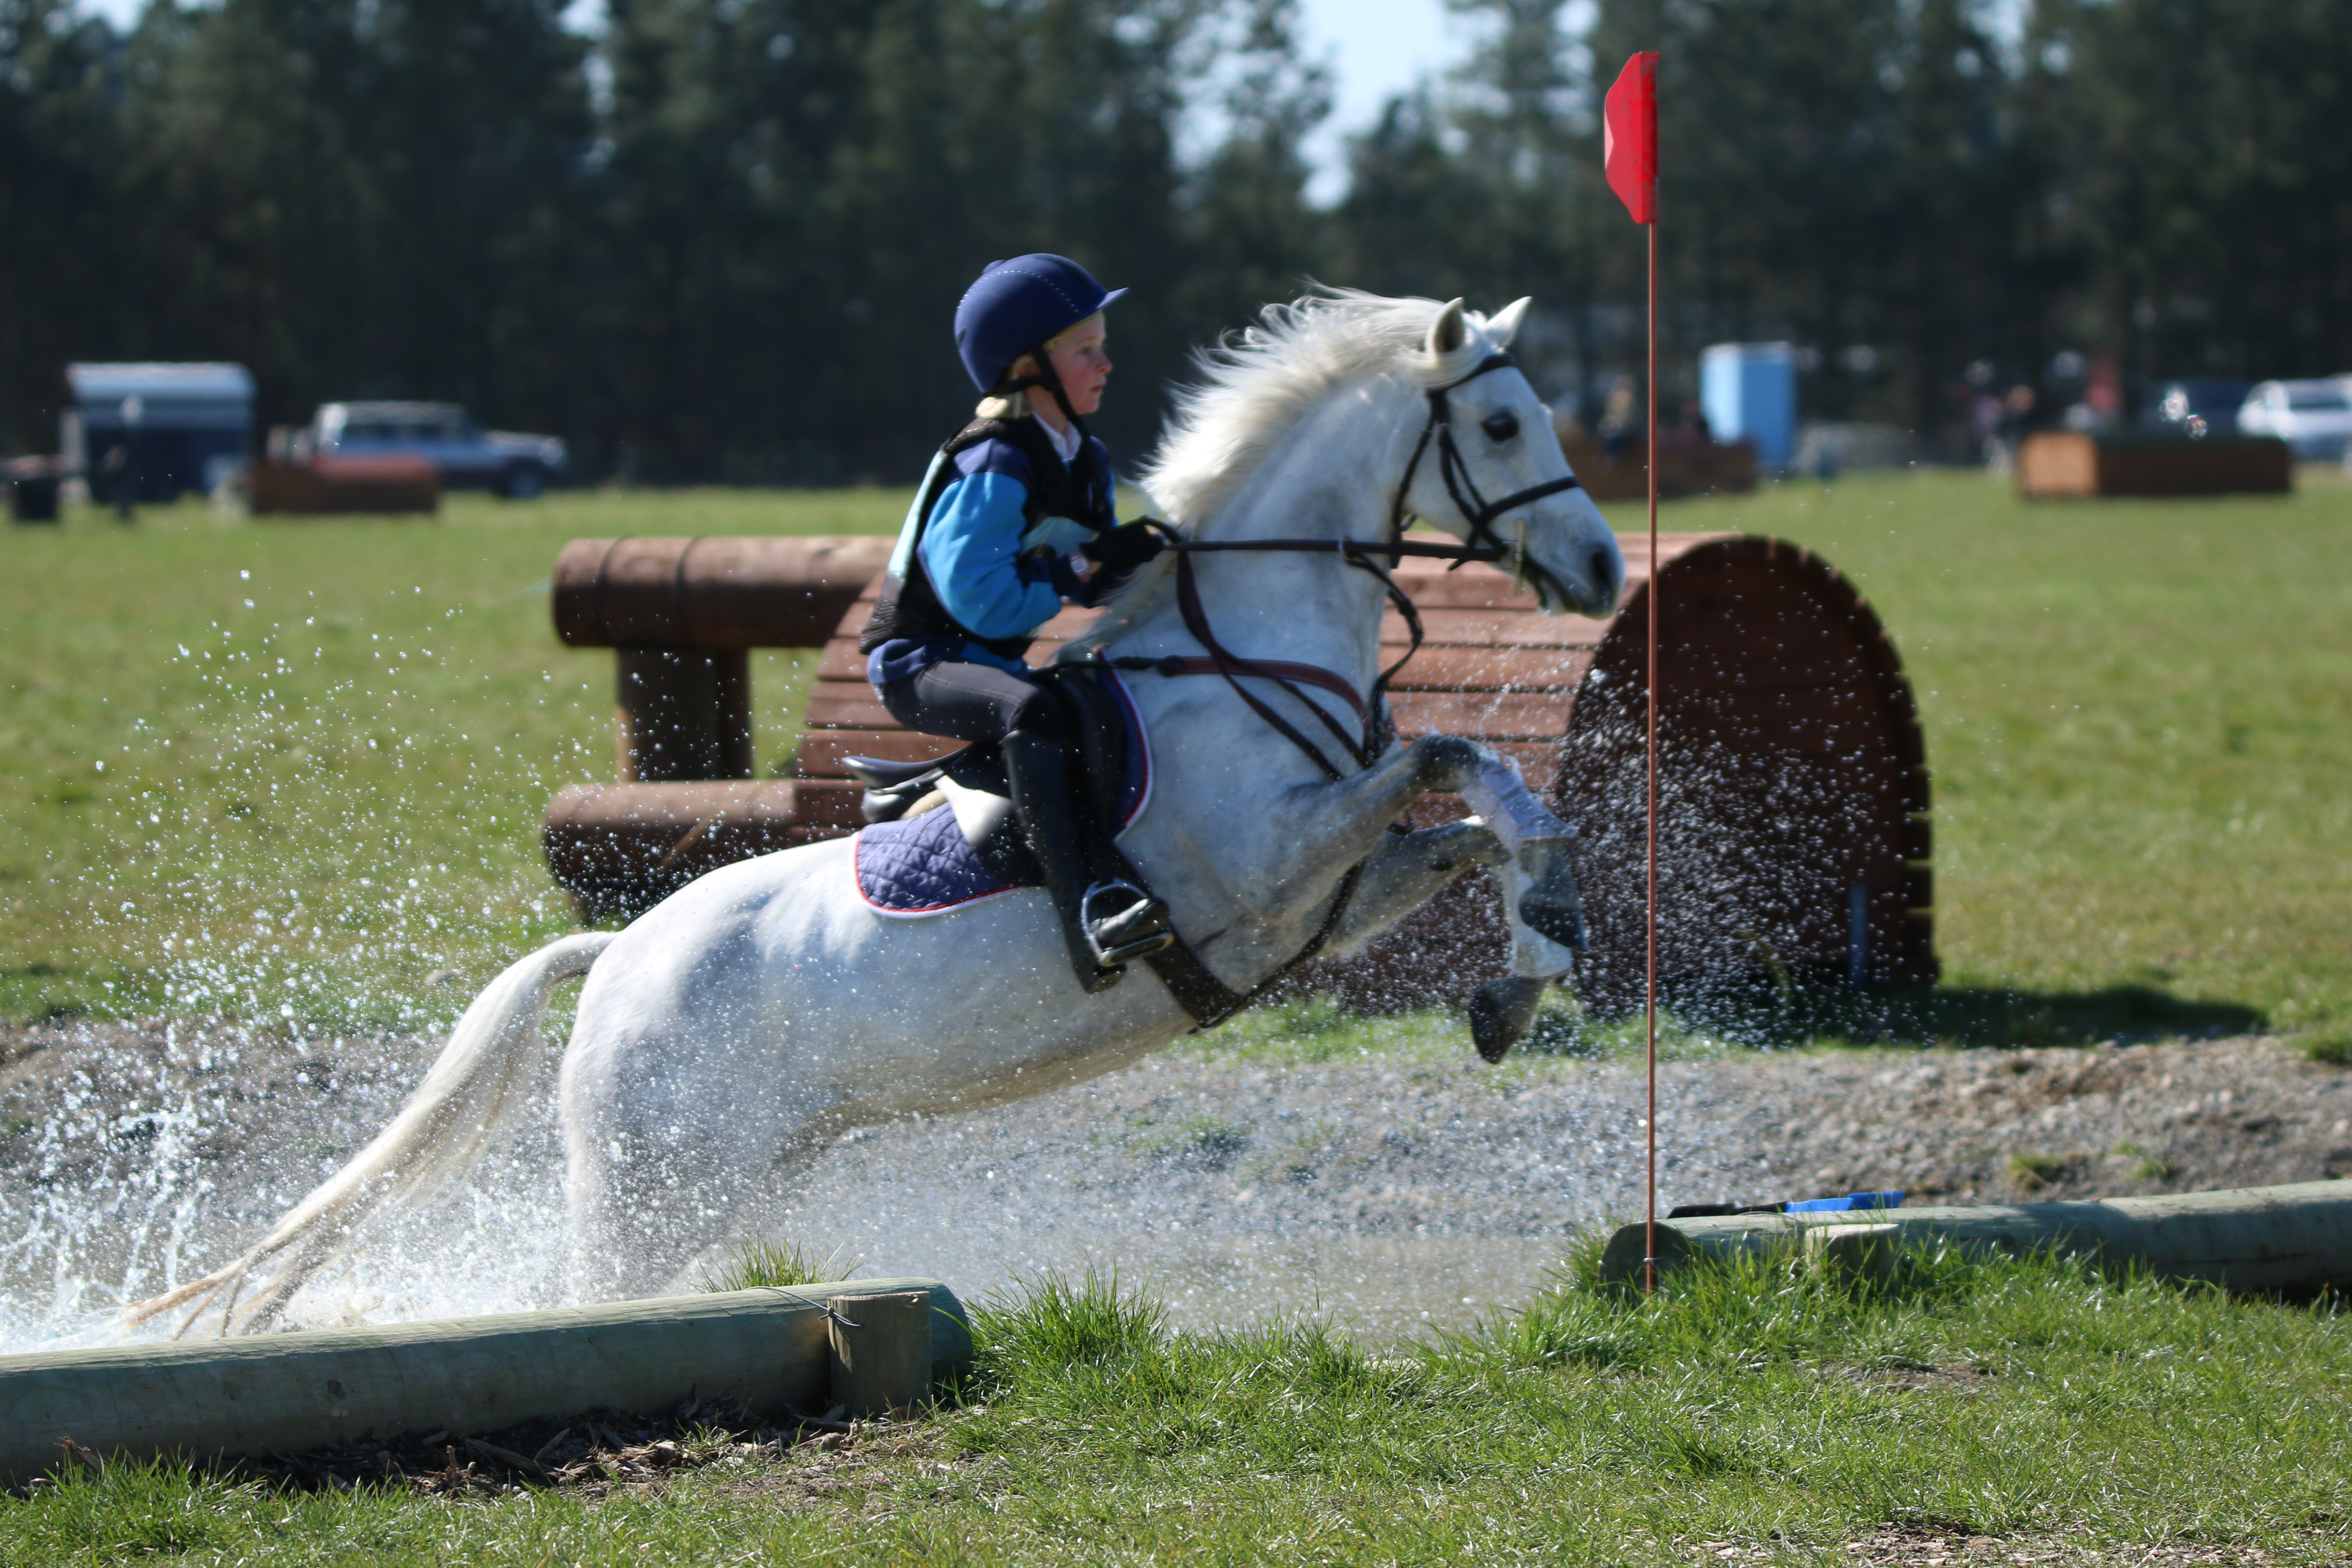 Johanna Wylaars on Corivale Fairylights will be competing in the Junior competition riding for Eyreton Navy. 